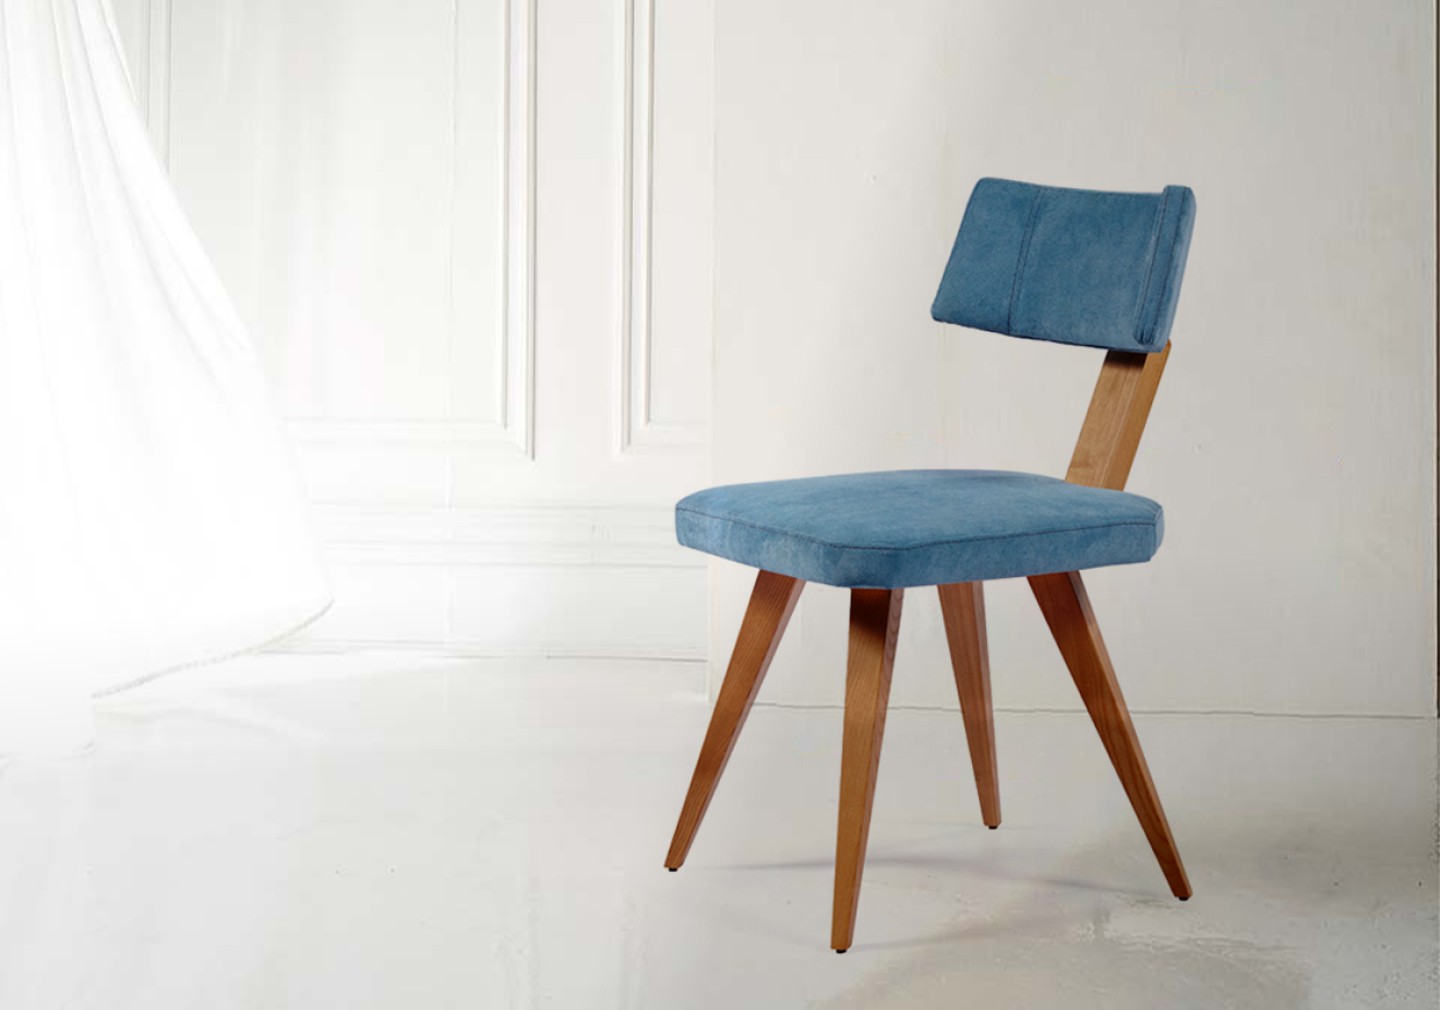 THE MILAN DINING CHAIR